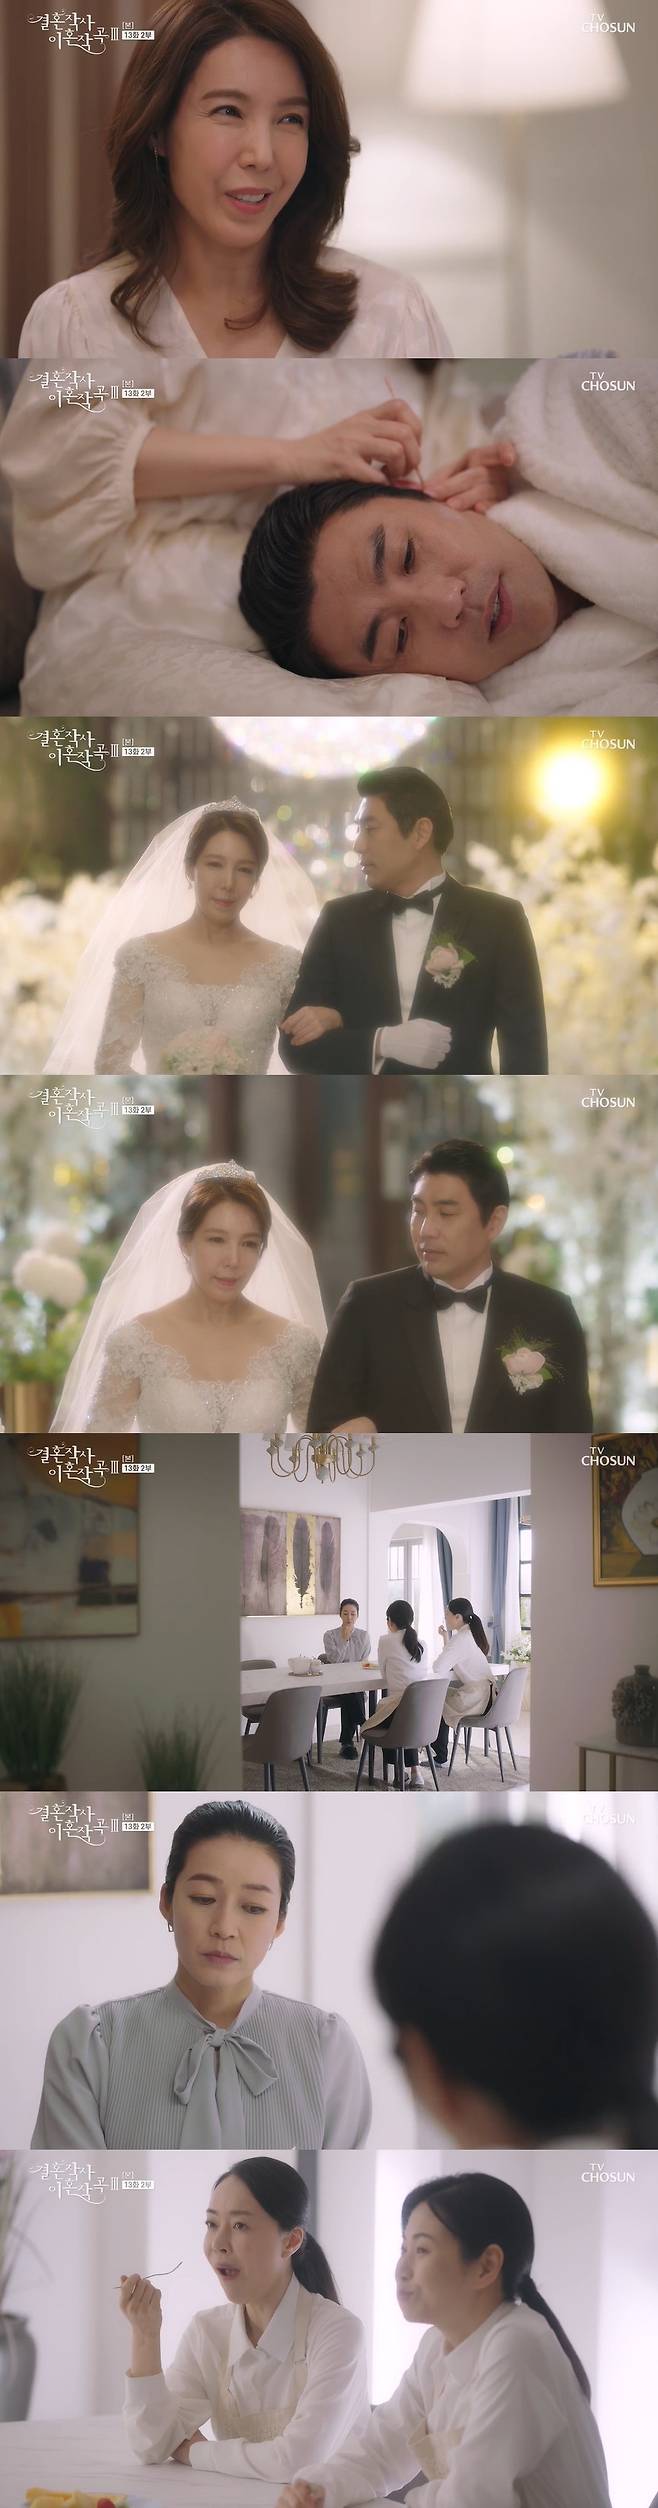 Seoul = = Marriage Writer Divorce Composition 3 Hye-sook Lee Confessions to Ami that he killed Noh Joo-hyun.Jean Soo-kyung and Moon Sung-ho got married, and Lee Ga-ryeong started having morning sickness.On the 23rd TV weekend, Drama Drived Composition 3 of Marriage Writing (playplayed by Im Sung-han/directed by Oh Sang-won Choi Young-soo) was portrayed by Kim Dong-mi (Hye-sook Lee), who is showing an increasingly bizarre appearance.On the same day, Seo Dong-ma (Boo Bae)s father visited the house of his daughter-in-law, Safi Young (Park Joo-mi), with his son.Kim Dong-mi, who visited Safi-youngs house with a dream of her granddaughter Shin Ji-ah (Park Seo-kyung) being kidnapped, said, I like the person so much, do you hear that?Kim Dong-mi, who went to the room, said, Why is the elderly person so good? The force is not a joke. Even though he laughed, Shin Ki-rim suddenly appeared, Is not it the director?I was afraid that Kim Dong-mi was beaten by her husband, Shin Ki-rim (Noh Jo-hyun), who had left the world, and she was frightened by the western half (Moon Sung-ho).Safi Young was told by Shin Yu-shin (Ji Young-san) and Ami (Song Ji-in) that Kim Dong-mis condition was not good.While Safi Young was out, Kim Dong-mi was exercising alone and singing the periodical text, and he was also seen to be in and out of his mind, saying, I am already like my mother and I want to value the person.Safi Young and Shin Yusin Ami suggested Kim Dong-mi to have a health checkup. Kim Dong-mi refused, saying, I have to take care of Jia today. However, Safi Young decided to get a health checkup because he did not go to work.Ami tried to meet her, saying, My mothers health is our happiness, but Kim Dong-mi said, Its like an exhilaration.Kim Dong-mi also said to Safi Young, I caught up, where do you meet the bachelor groom? He said, I saved the country in my past life.Kim Dong-mi became sharper to Ami. When Ami gave him a nutritional supplement, he said, You eat, why do you eat? What do you know?When I asked, I came out with a red bean paste and said, Do not you want me to eat and die? He said, I killed the director like that. He also told Shin Ki-rim that he had been fed carbohydrates to soar blood sugar and blood pressure, and Kim Dong-mis creepy smile made Ami look terrified.Kim Dong-mi also said, I grabbed my heart once without pain and said goodbye, Sayonara, Bye-bye. Ami was scared and shivered, saying, Have you died like that?It was the wedding day of the West Ban (Moon Sung-ho) and Ishieun (Jeon Soo-kyong), and the two had a happy wedding ceremony in celebration of the guests.The two of them then went on a honeymoon and spent a sweet time alone. Ishieun showed his affection by digging the ear of the West.In the meantime, the questionable appearance of Choi, the deacon (Park Jung-eon), who was in the western house, attracted attention.Earlier, when Ishi moved to the house of the West Bank, he said, Cold and hungry things come in a bunch. And he said, Do you want to see an old bride?I also laughed at it, and it gave me an ominous aura.On the other hand, Panmunho (Kim Eung-soo) called the monk to his house, judging that Songwon (Lee Min-young) was possessed by Bu Hye-ryong (Lee Ga-ryeong).The monk said, It is the right of the ice, he said, I have to go out of my way, I have a tough and strong soul, but it is not a bad soul.The young man has to go to my way, the road has changed, but I can stay in Lee Seung, he said. It is a problem if you go against the truth.I am trying to control people, he warned, sometimes I am trying to hurt people.After that, Buhye-ryong tried to eat a hamburger while riding in a car, and he had morning sickness and was surprised.